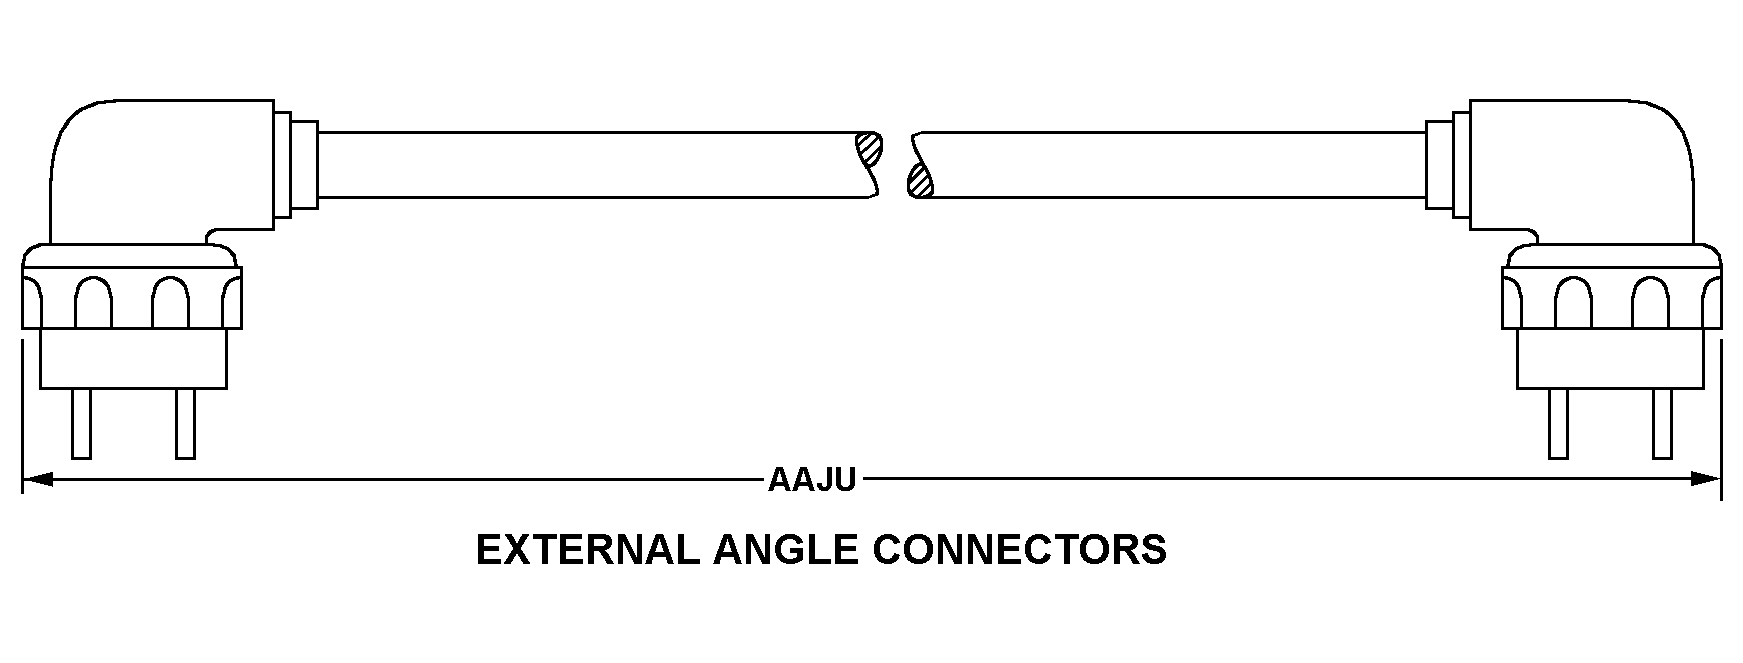 EXTERNAL ANGLE CONNECTORS style nsn 4935-01-213-1921